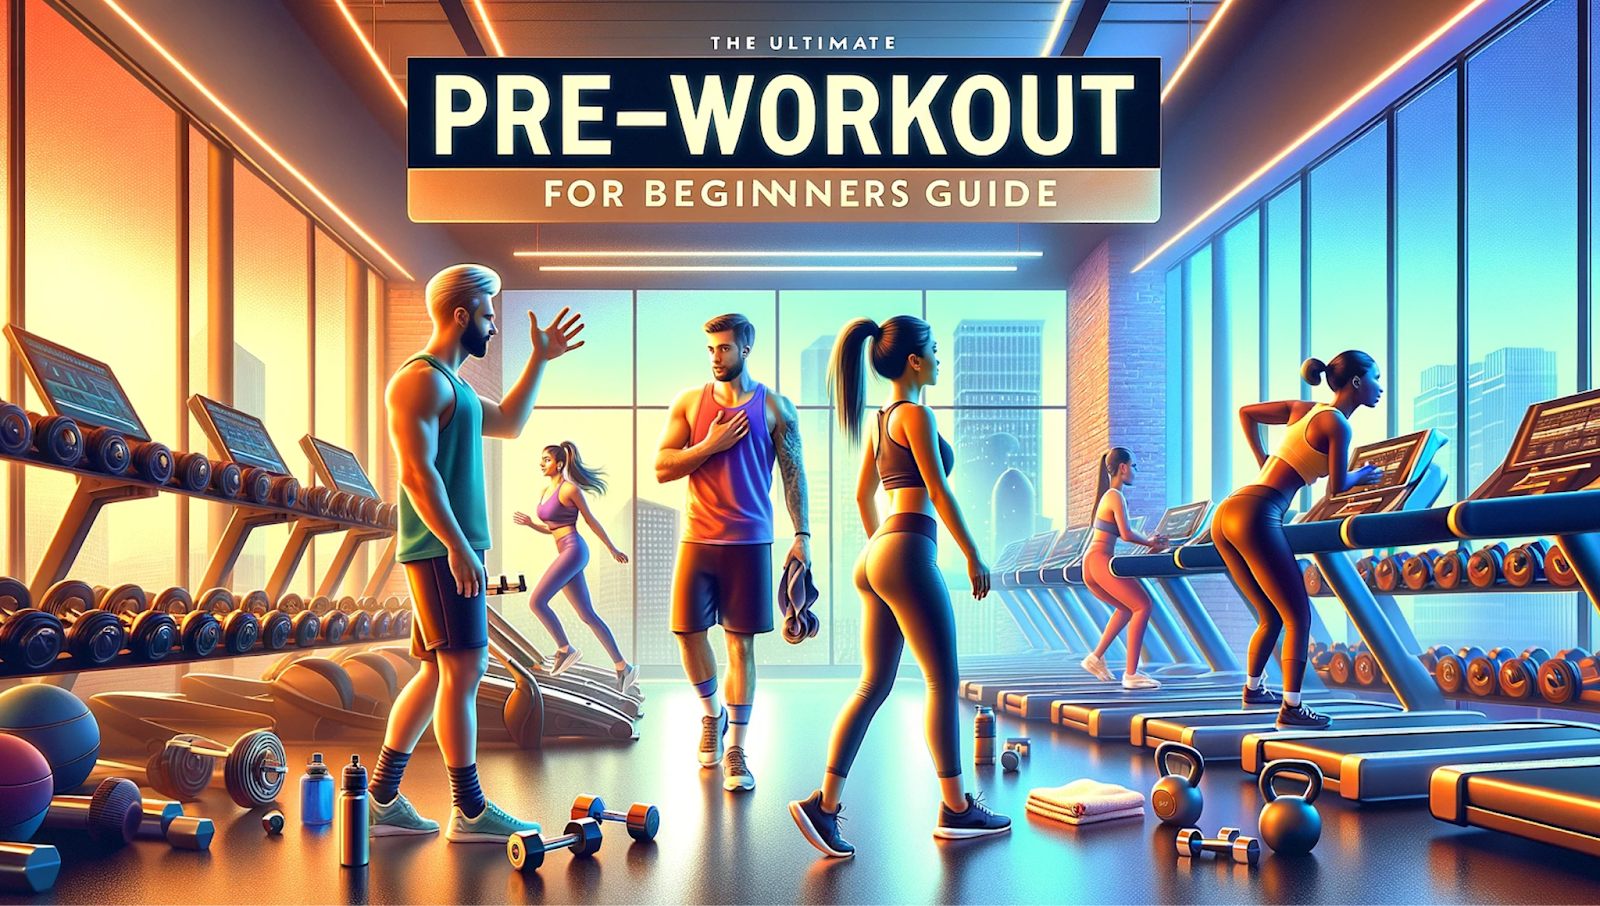 Are you new to the world of pre-workout supplements and looking to gain a deeper understanding of their benefits, ingredients, and safe usage? In this article, we will look into everything about Pre Workout for Beginners.